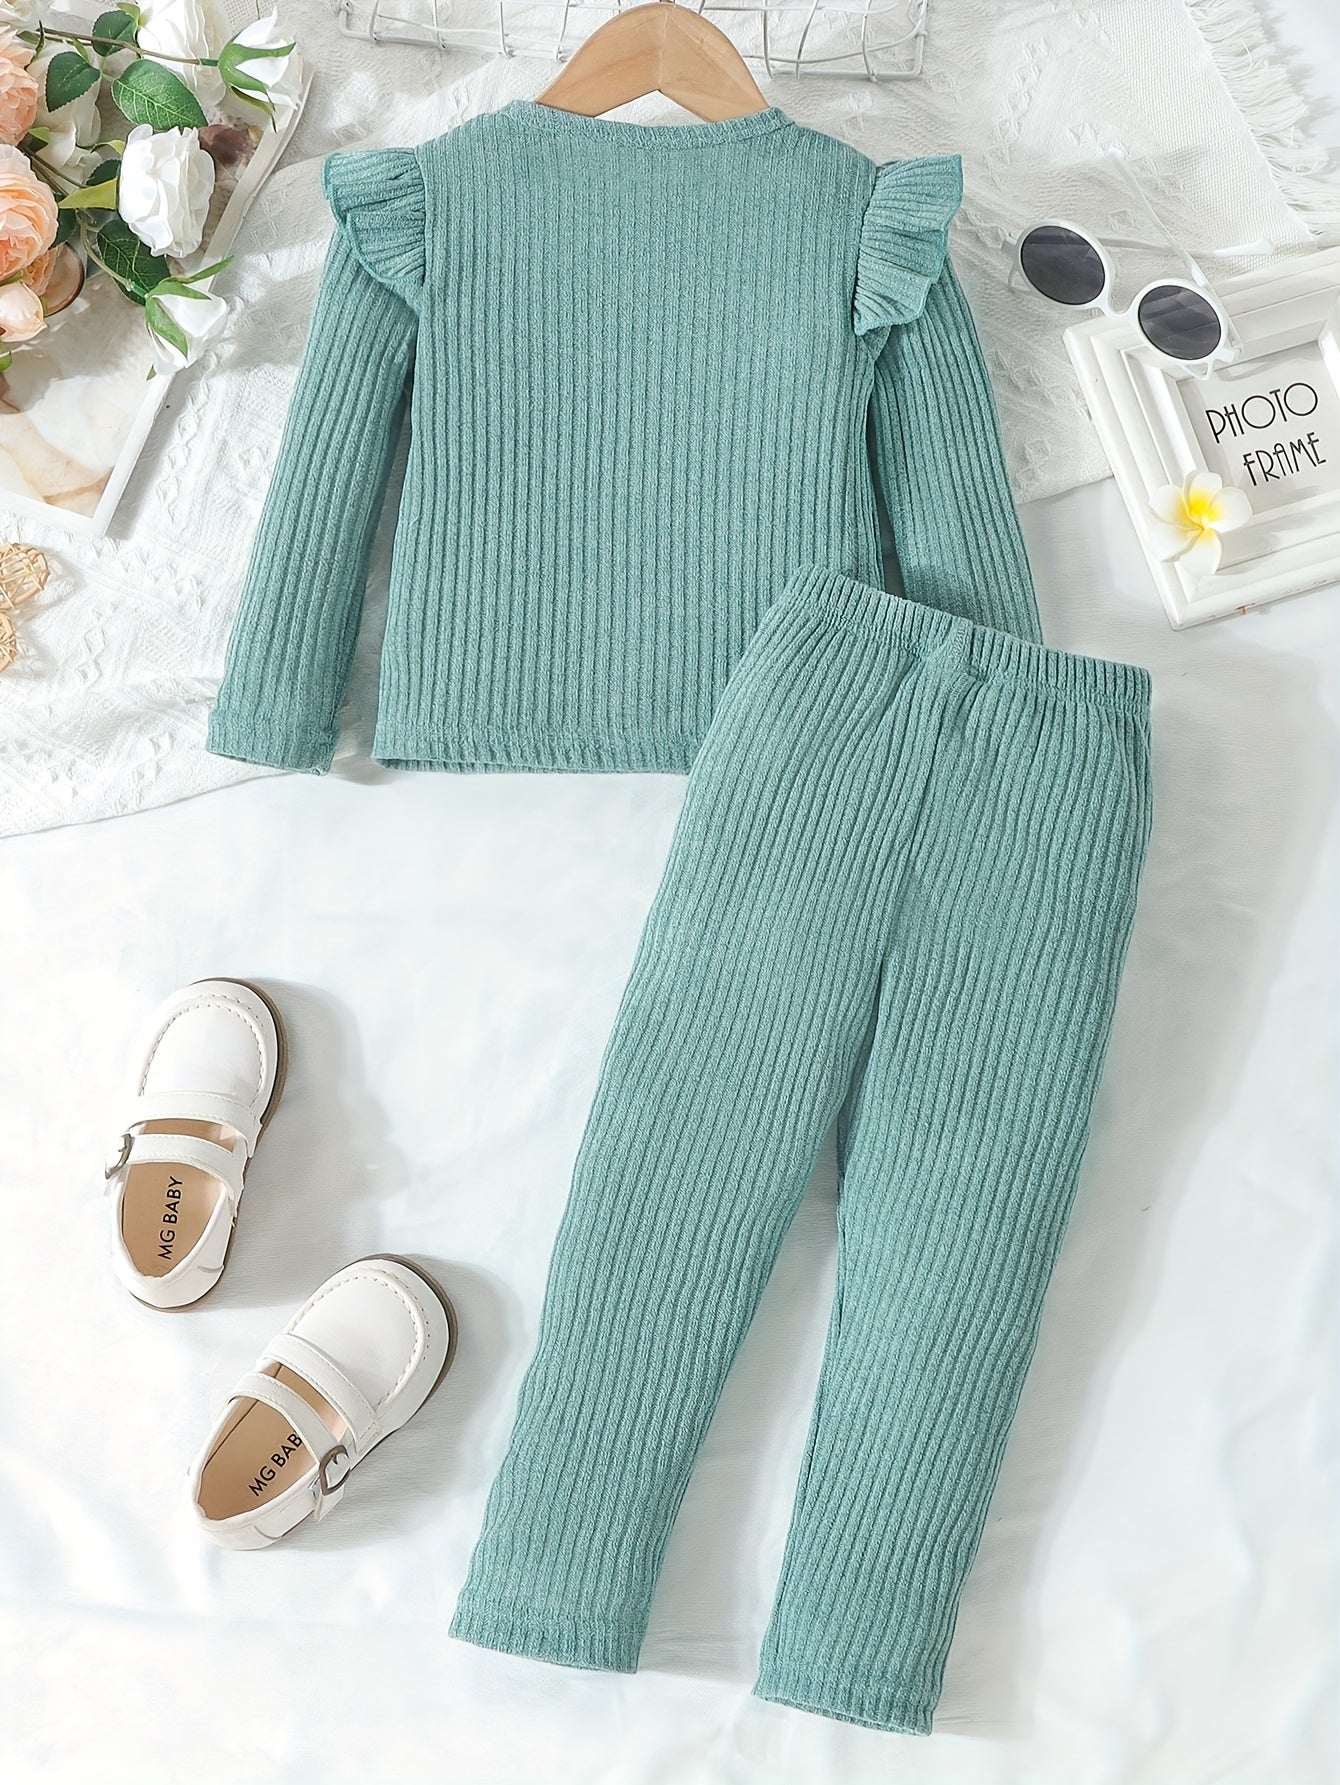 Girl's Solid Color Outfit 2pcs, Ribbed Long Sleeve Top & Pants Set, Kid's Clothes For Spring Fall